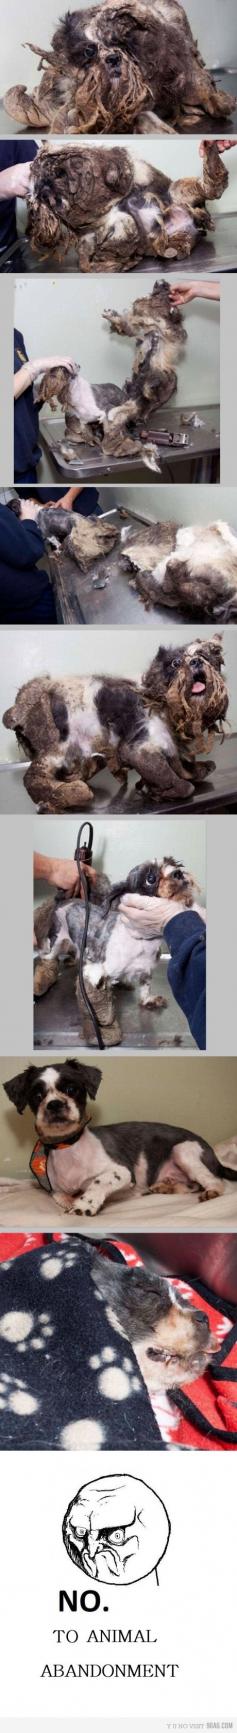 
                    
                        This is this dogs first haircut. You have to double click to get to see it up close. At first I wasn't sure what had happened to this poor little guy.
                    
                